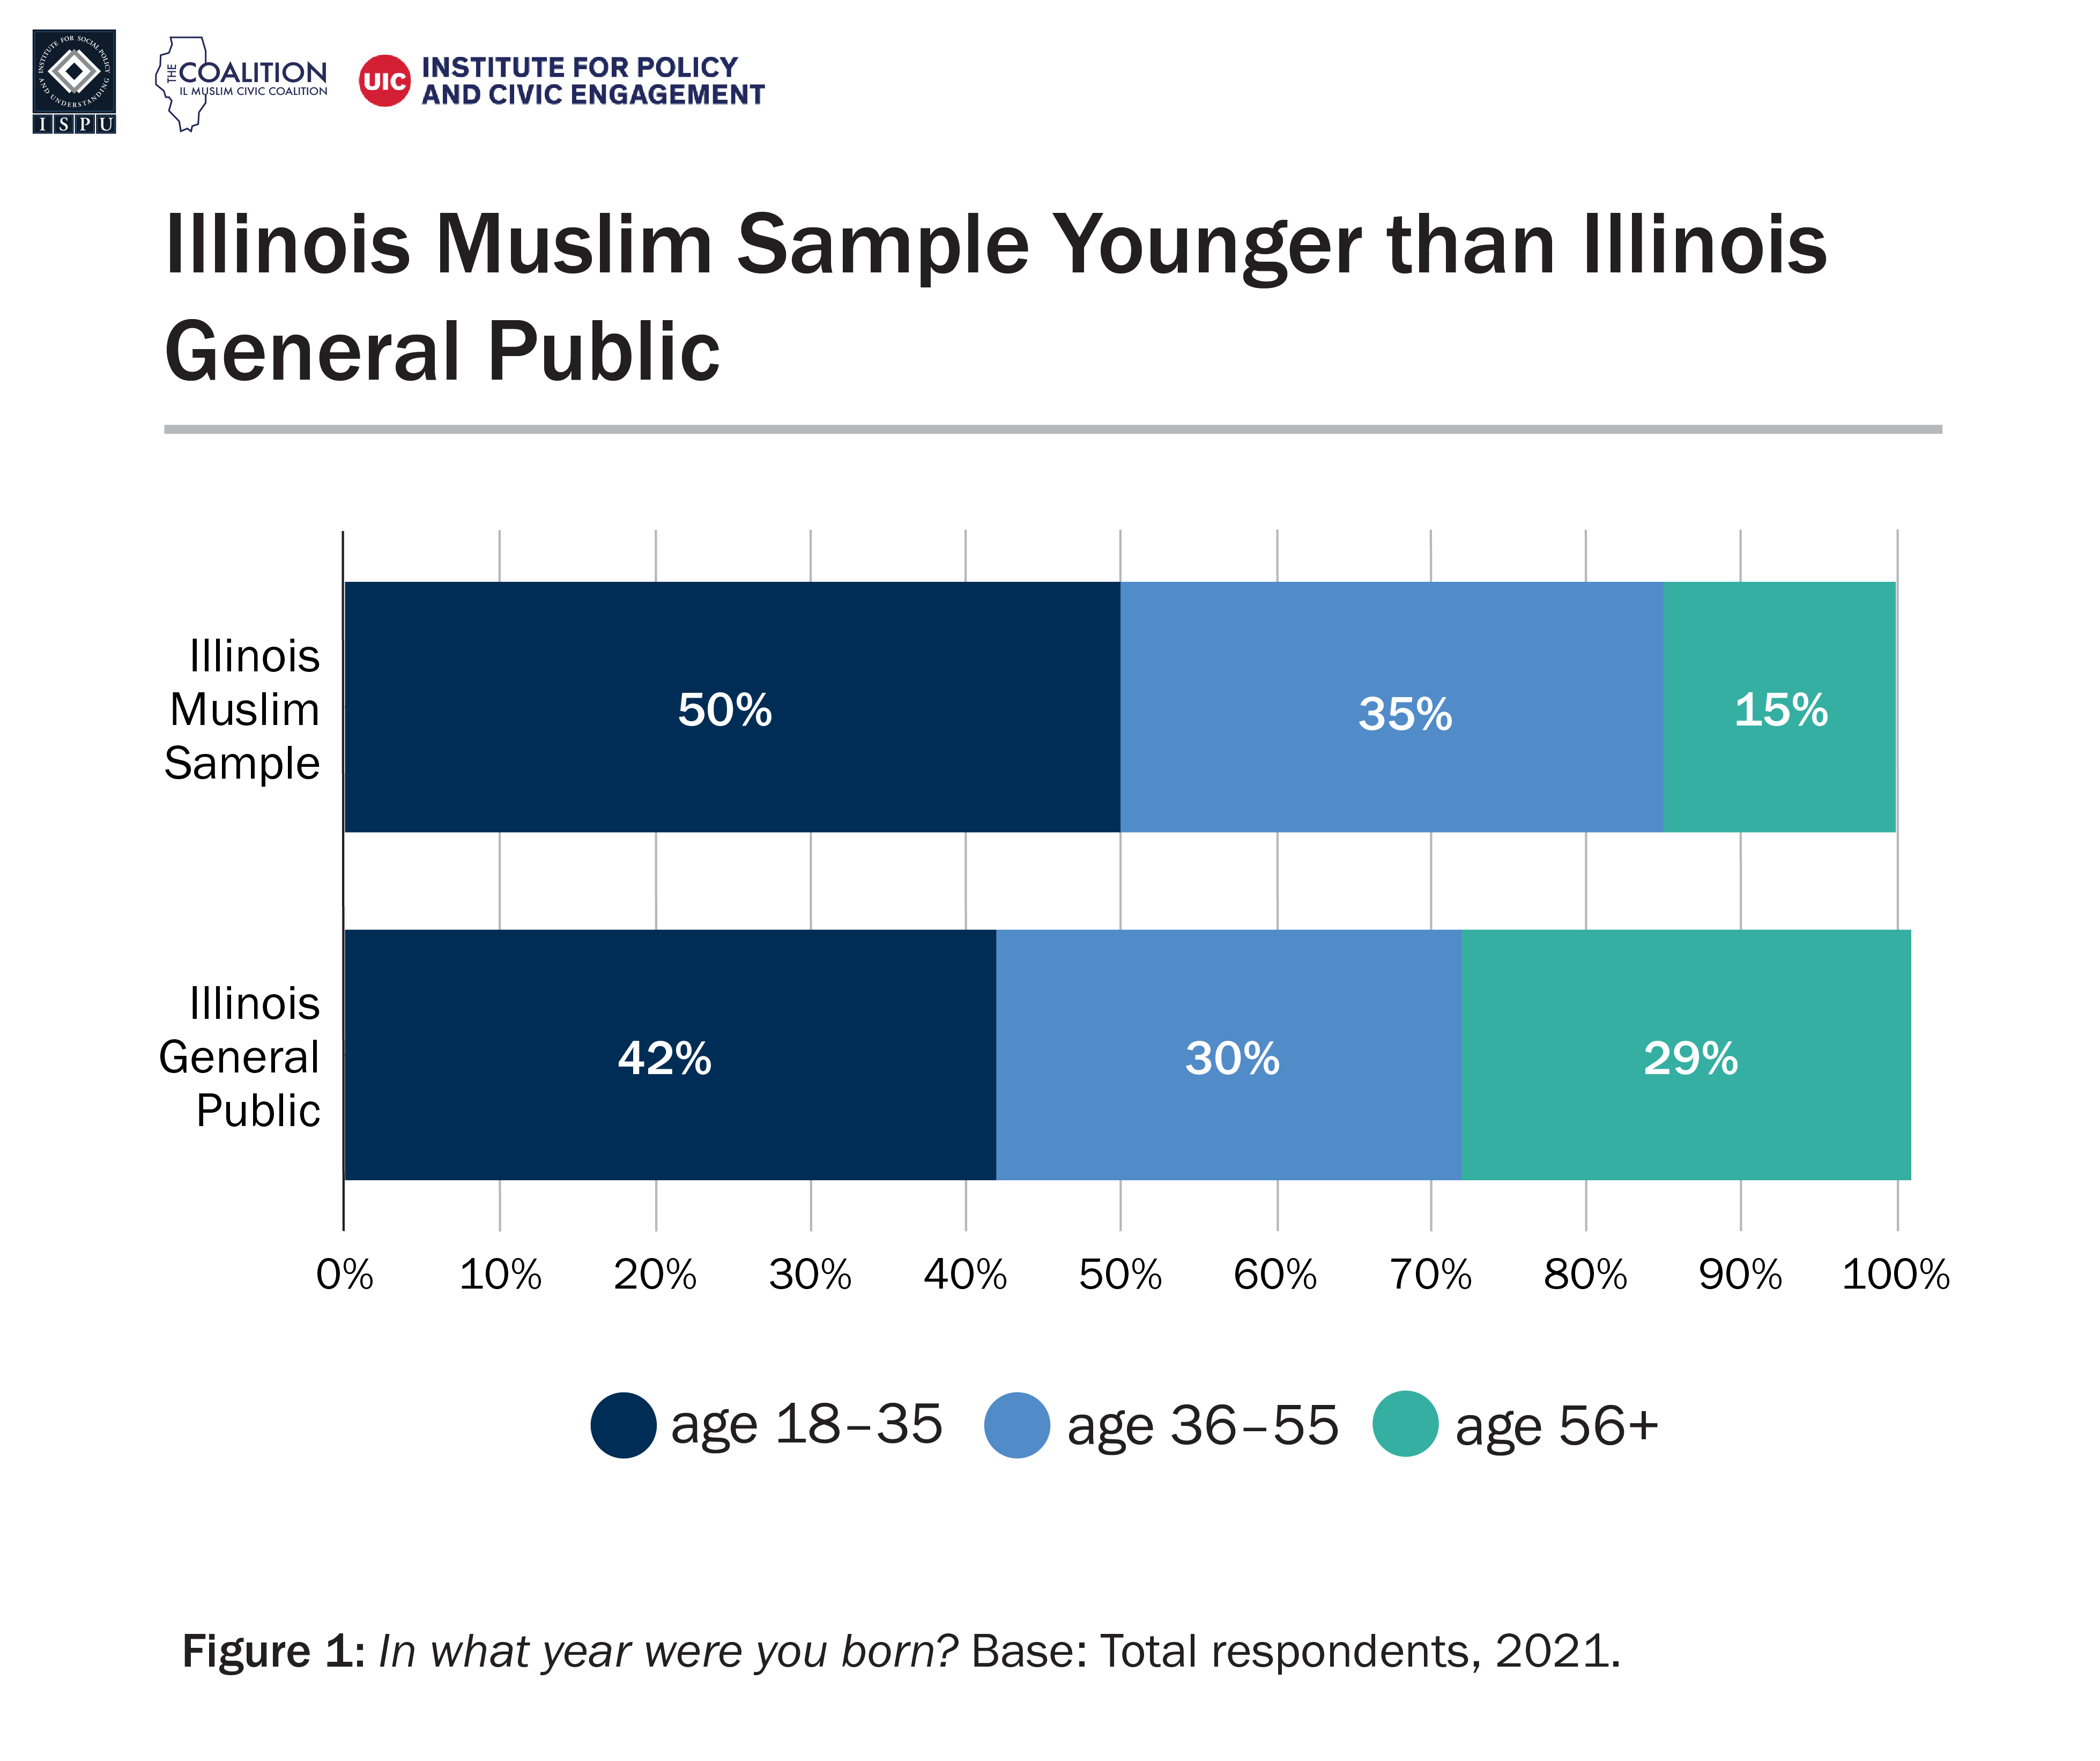 A bar graph with two bars depicting the age distribution of the Illinois Muslim sample and the Illinois general public